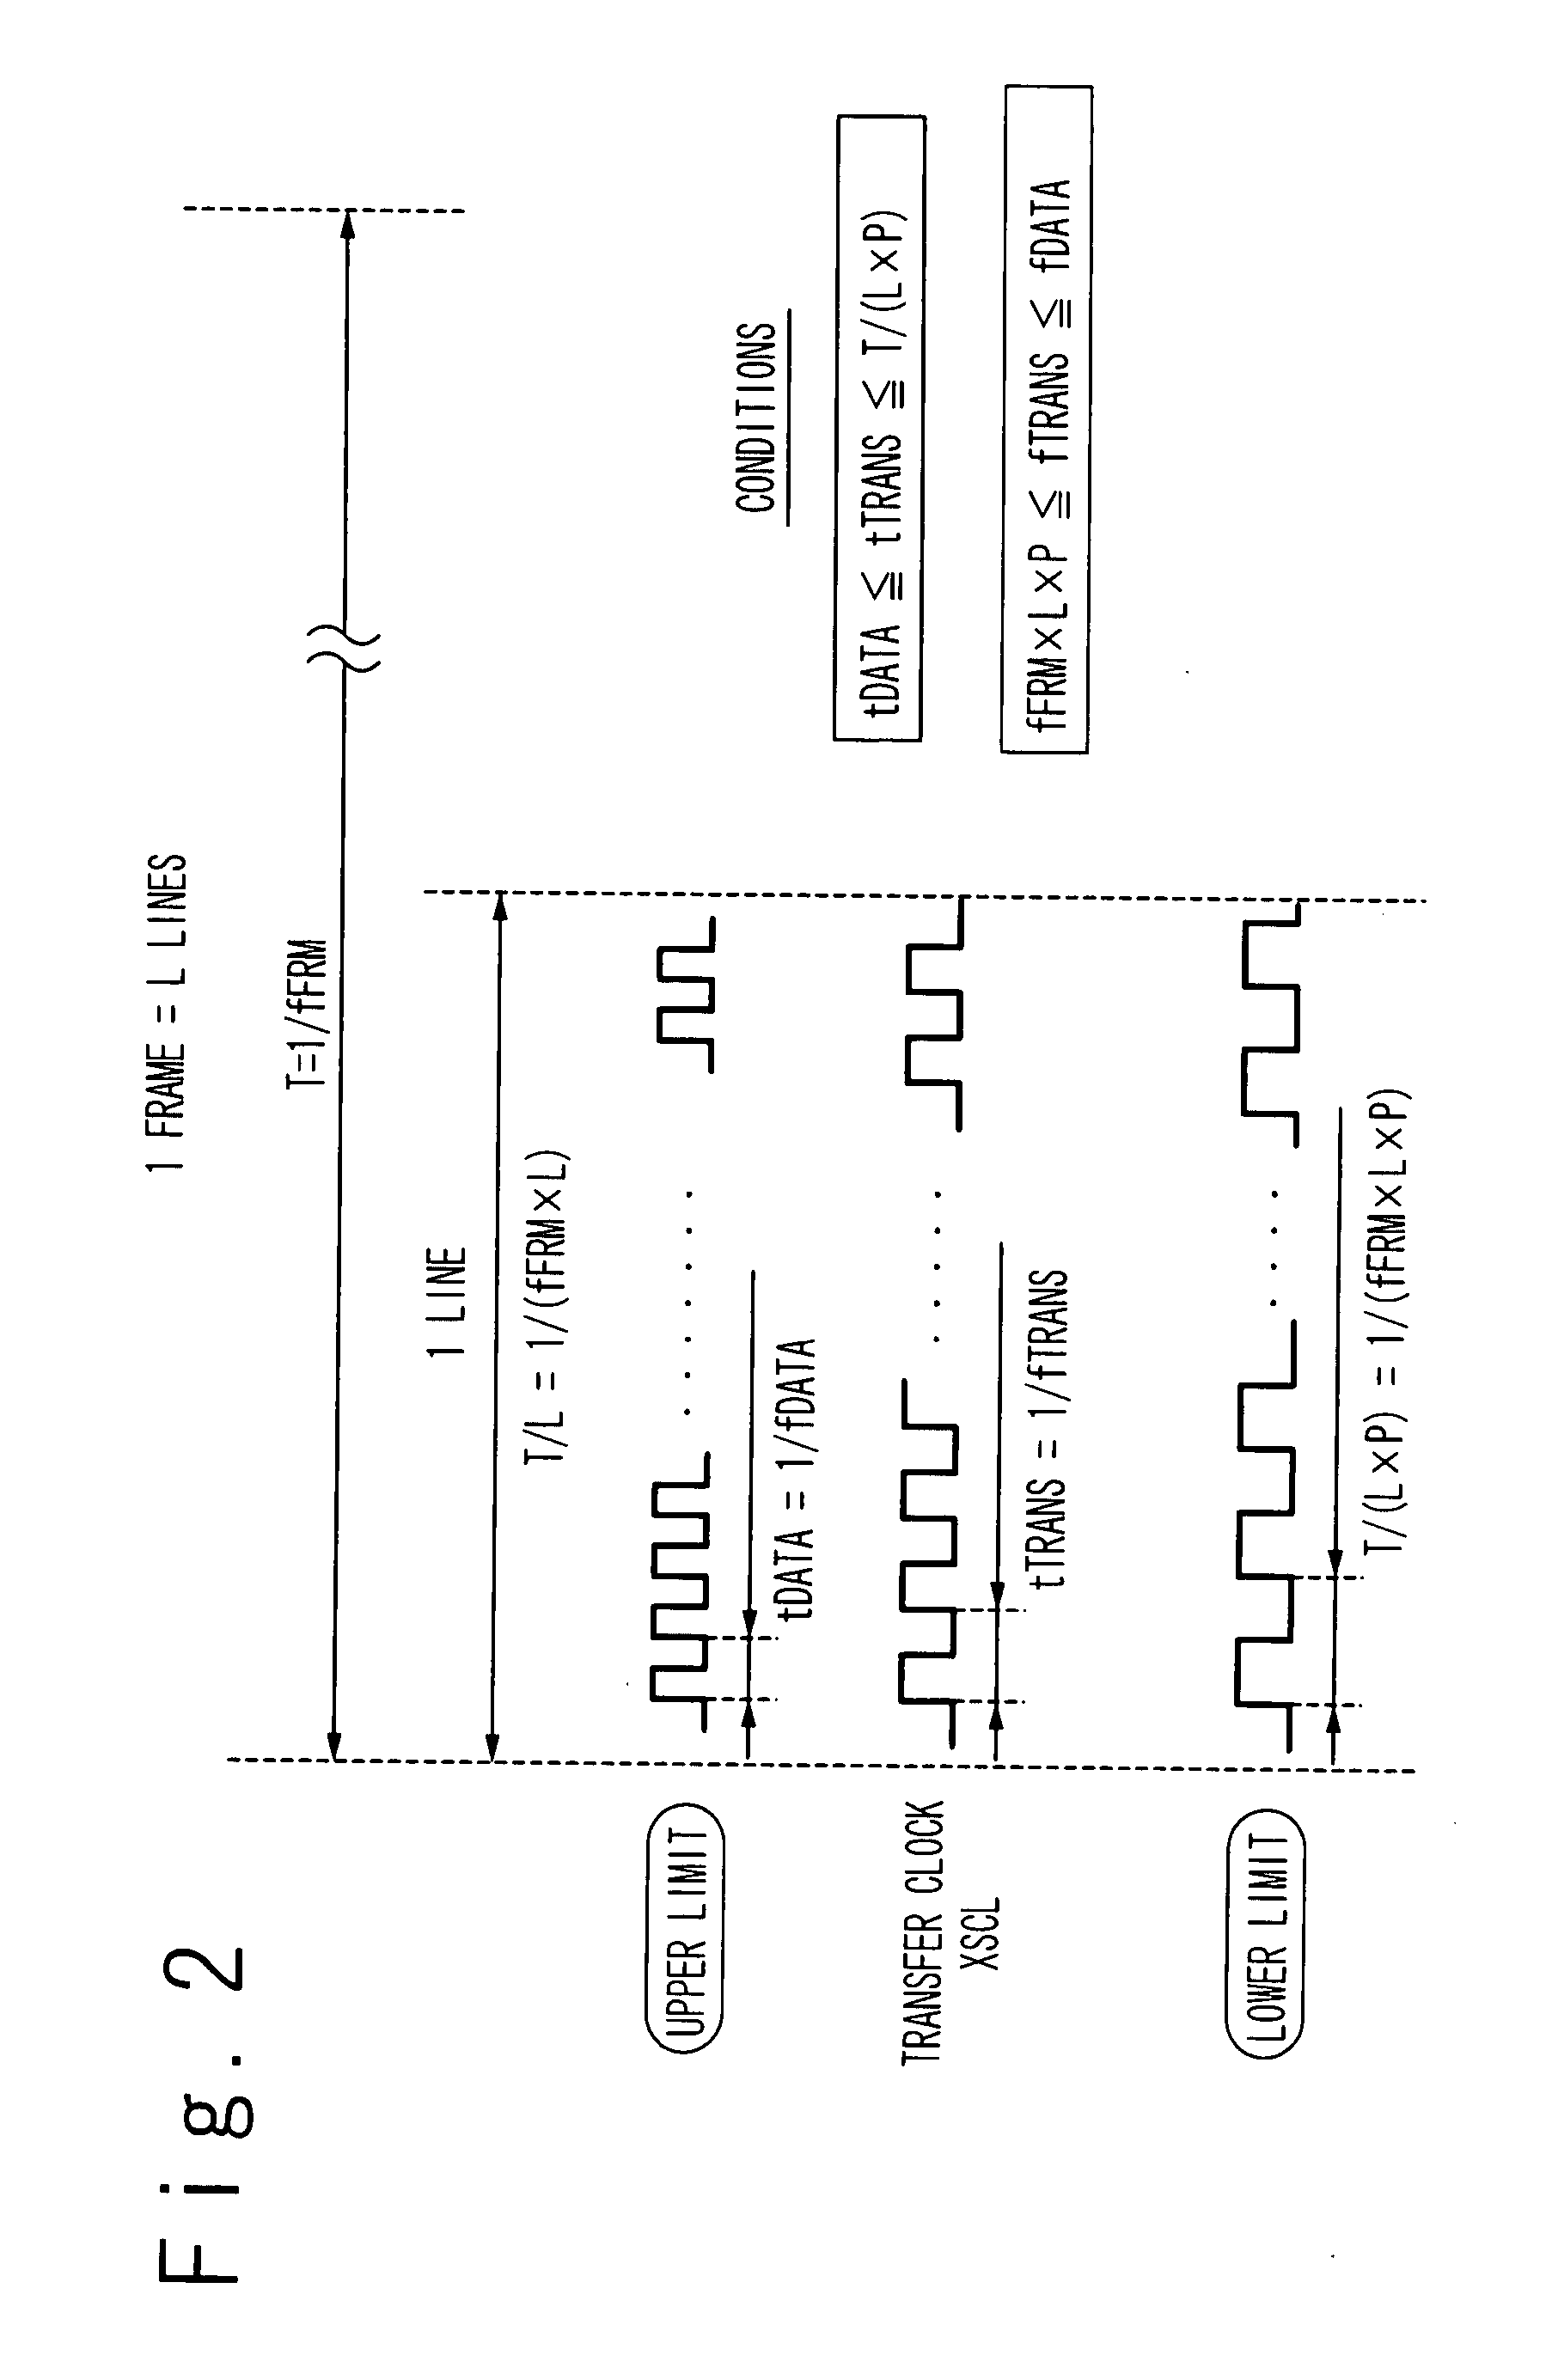 Display controller in display device, and method of transferring display data